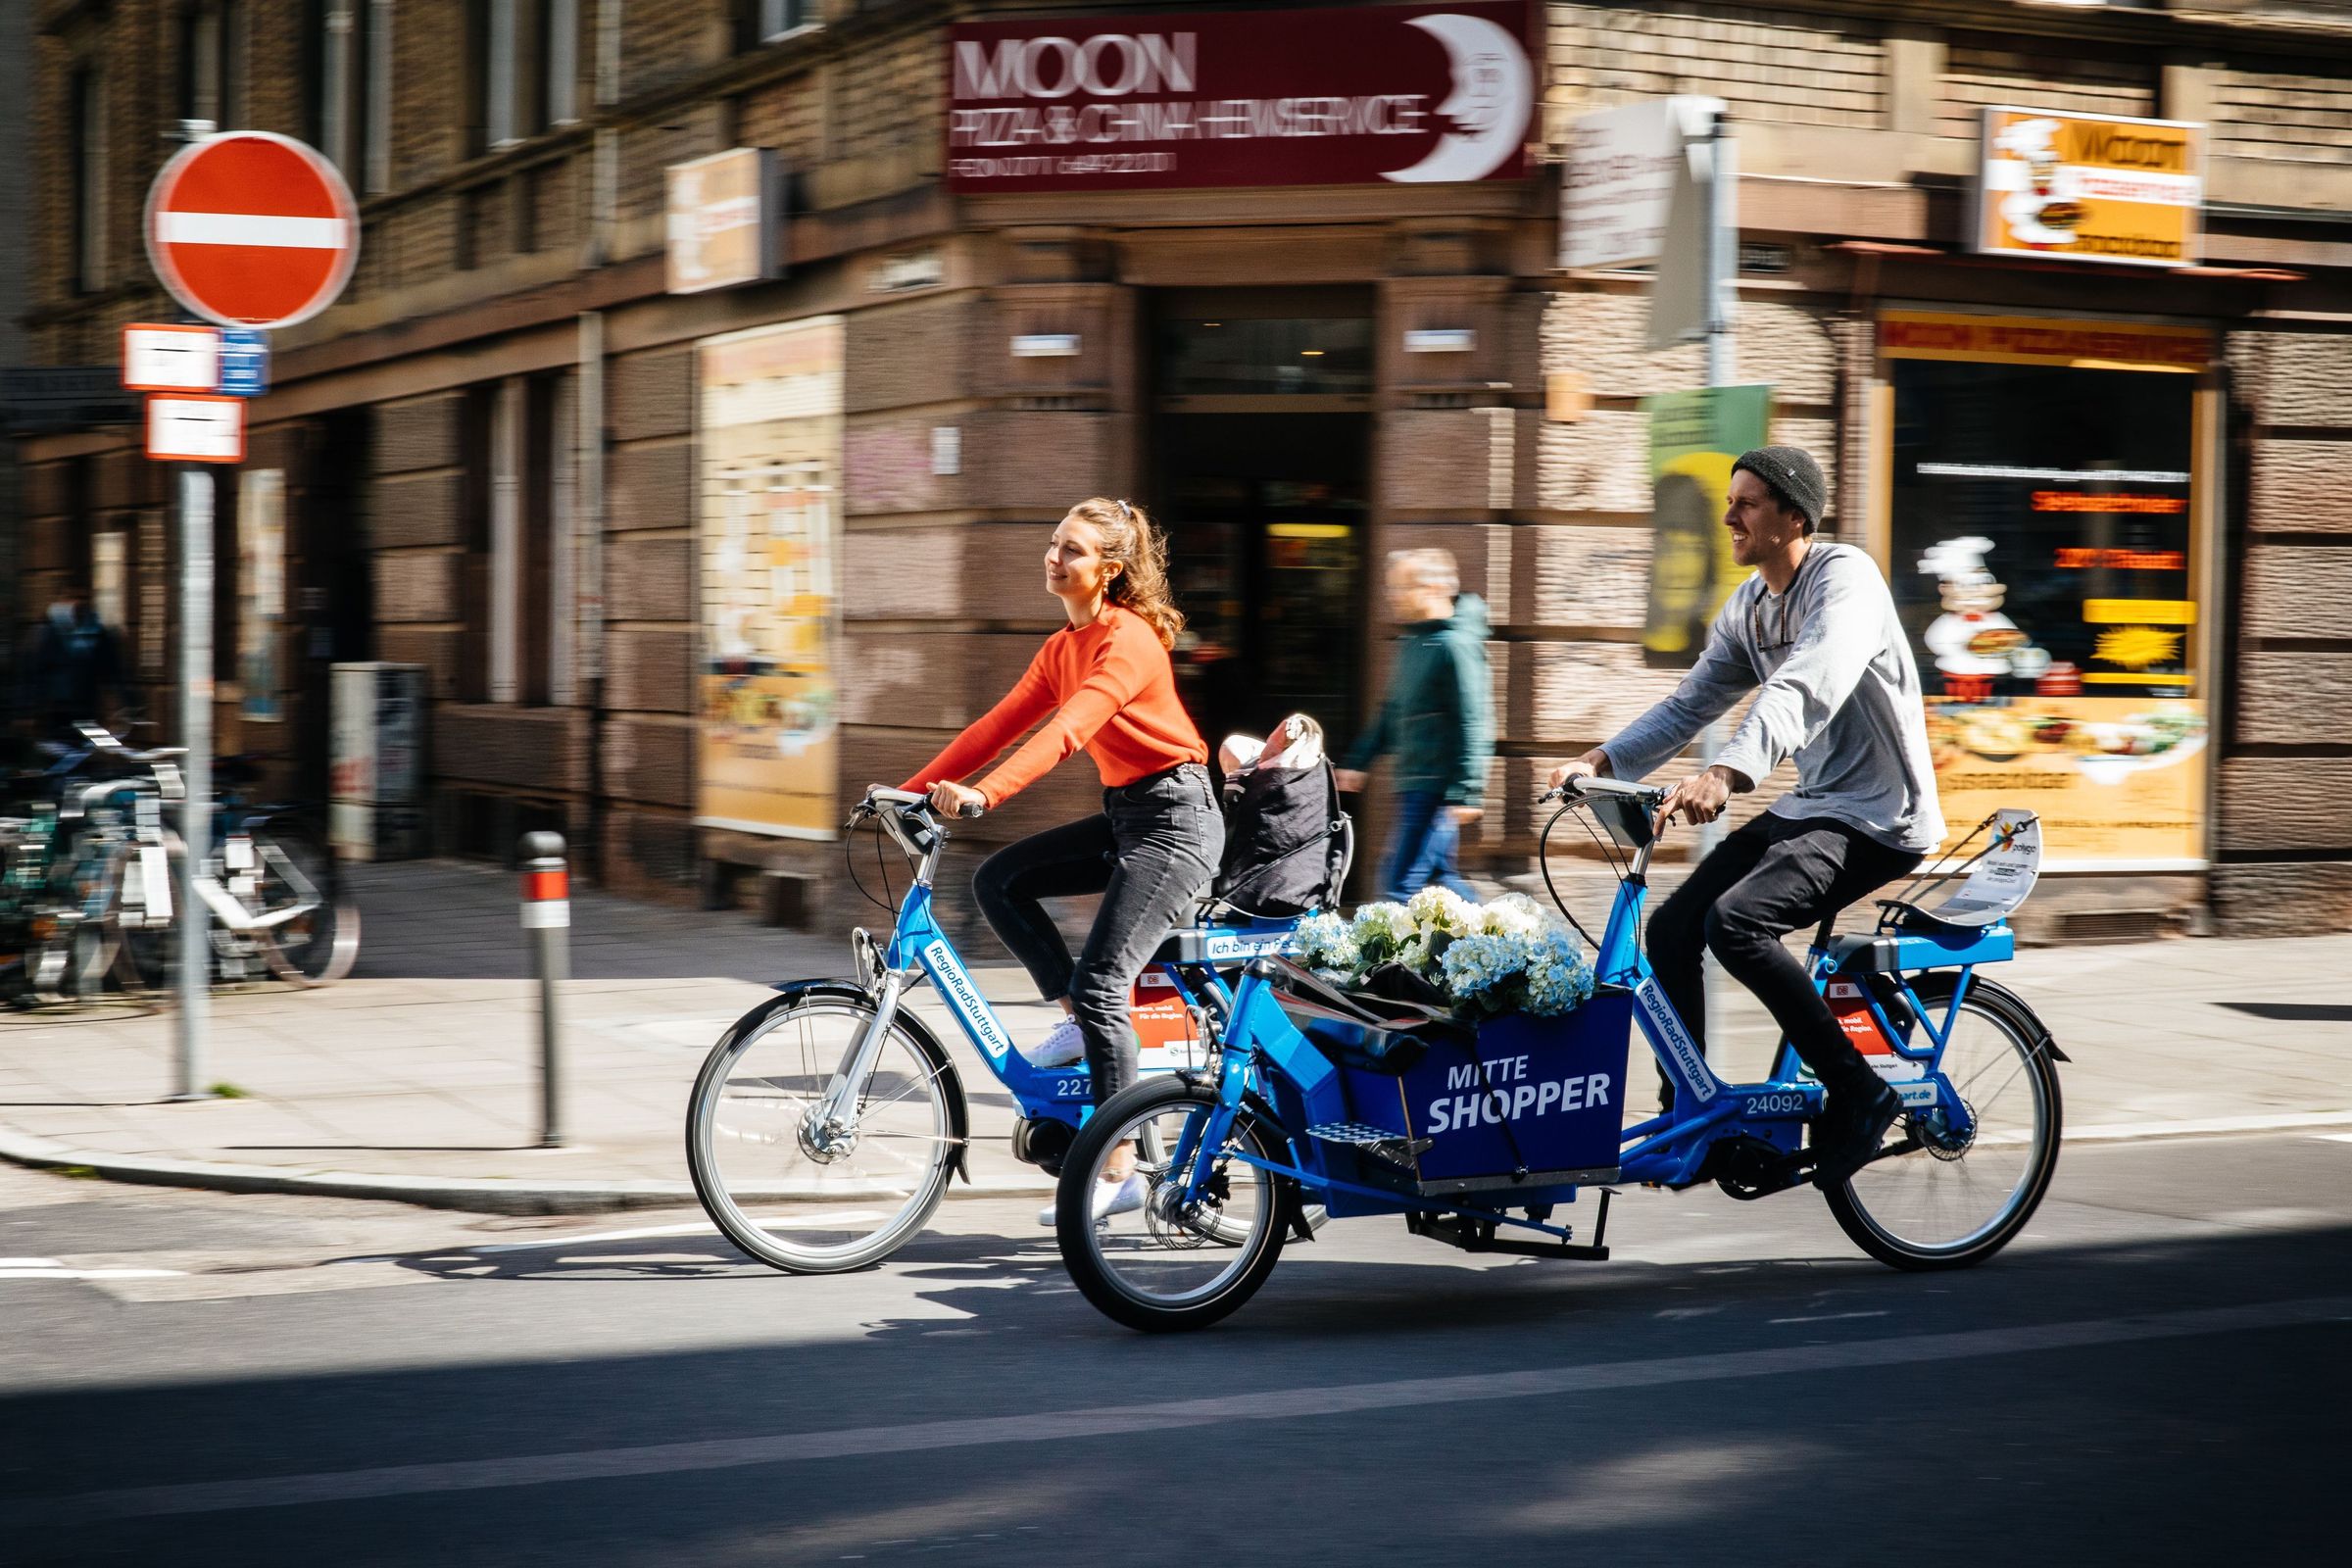 Couples on cargo bikes and bicycles ride through a city center